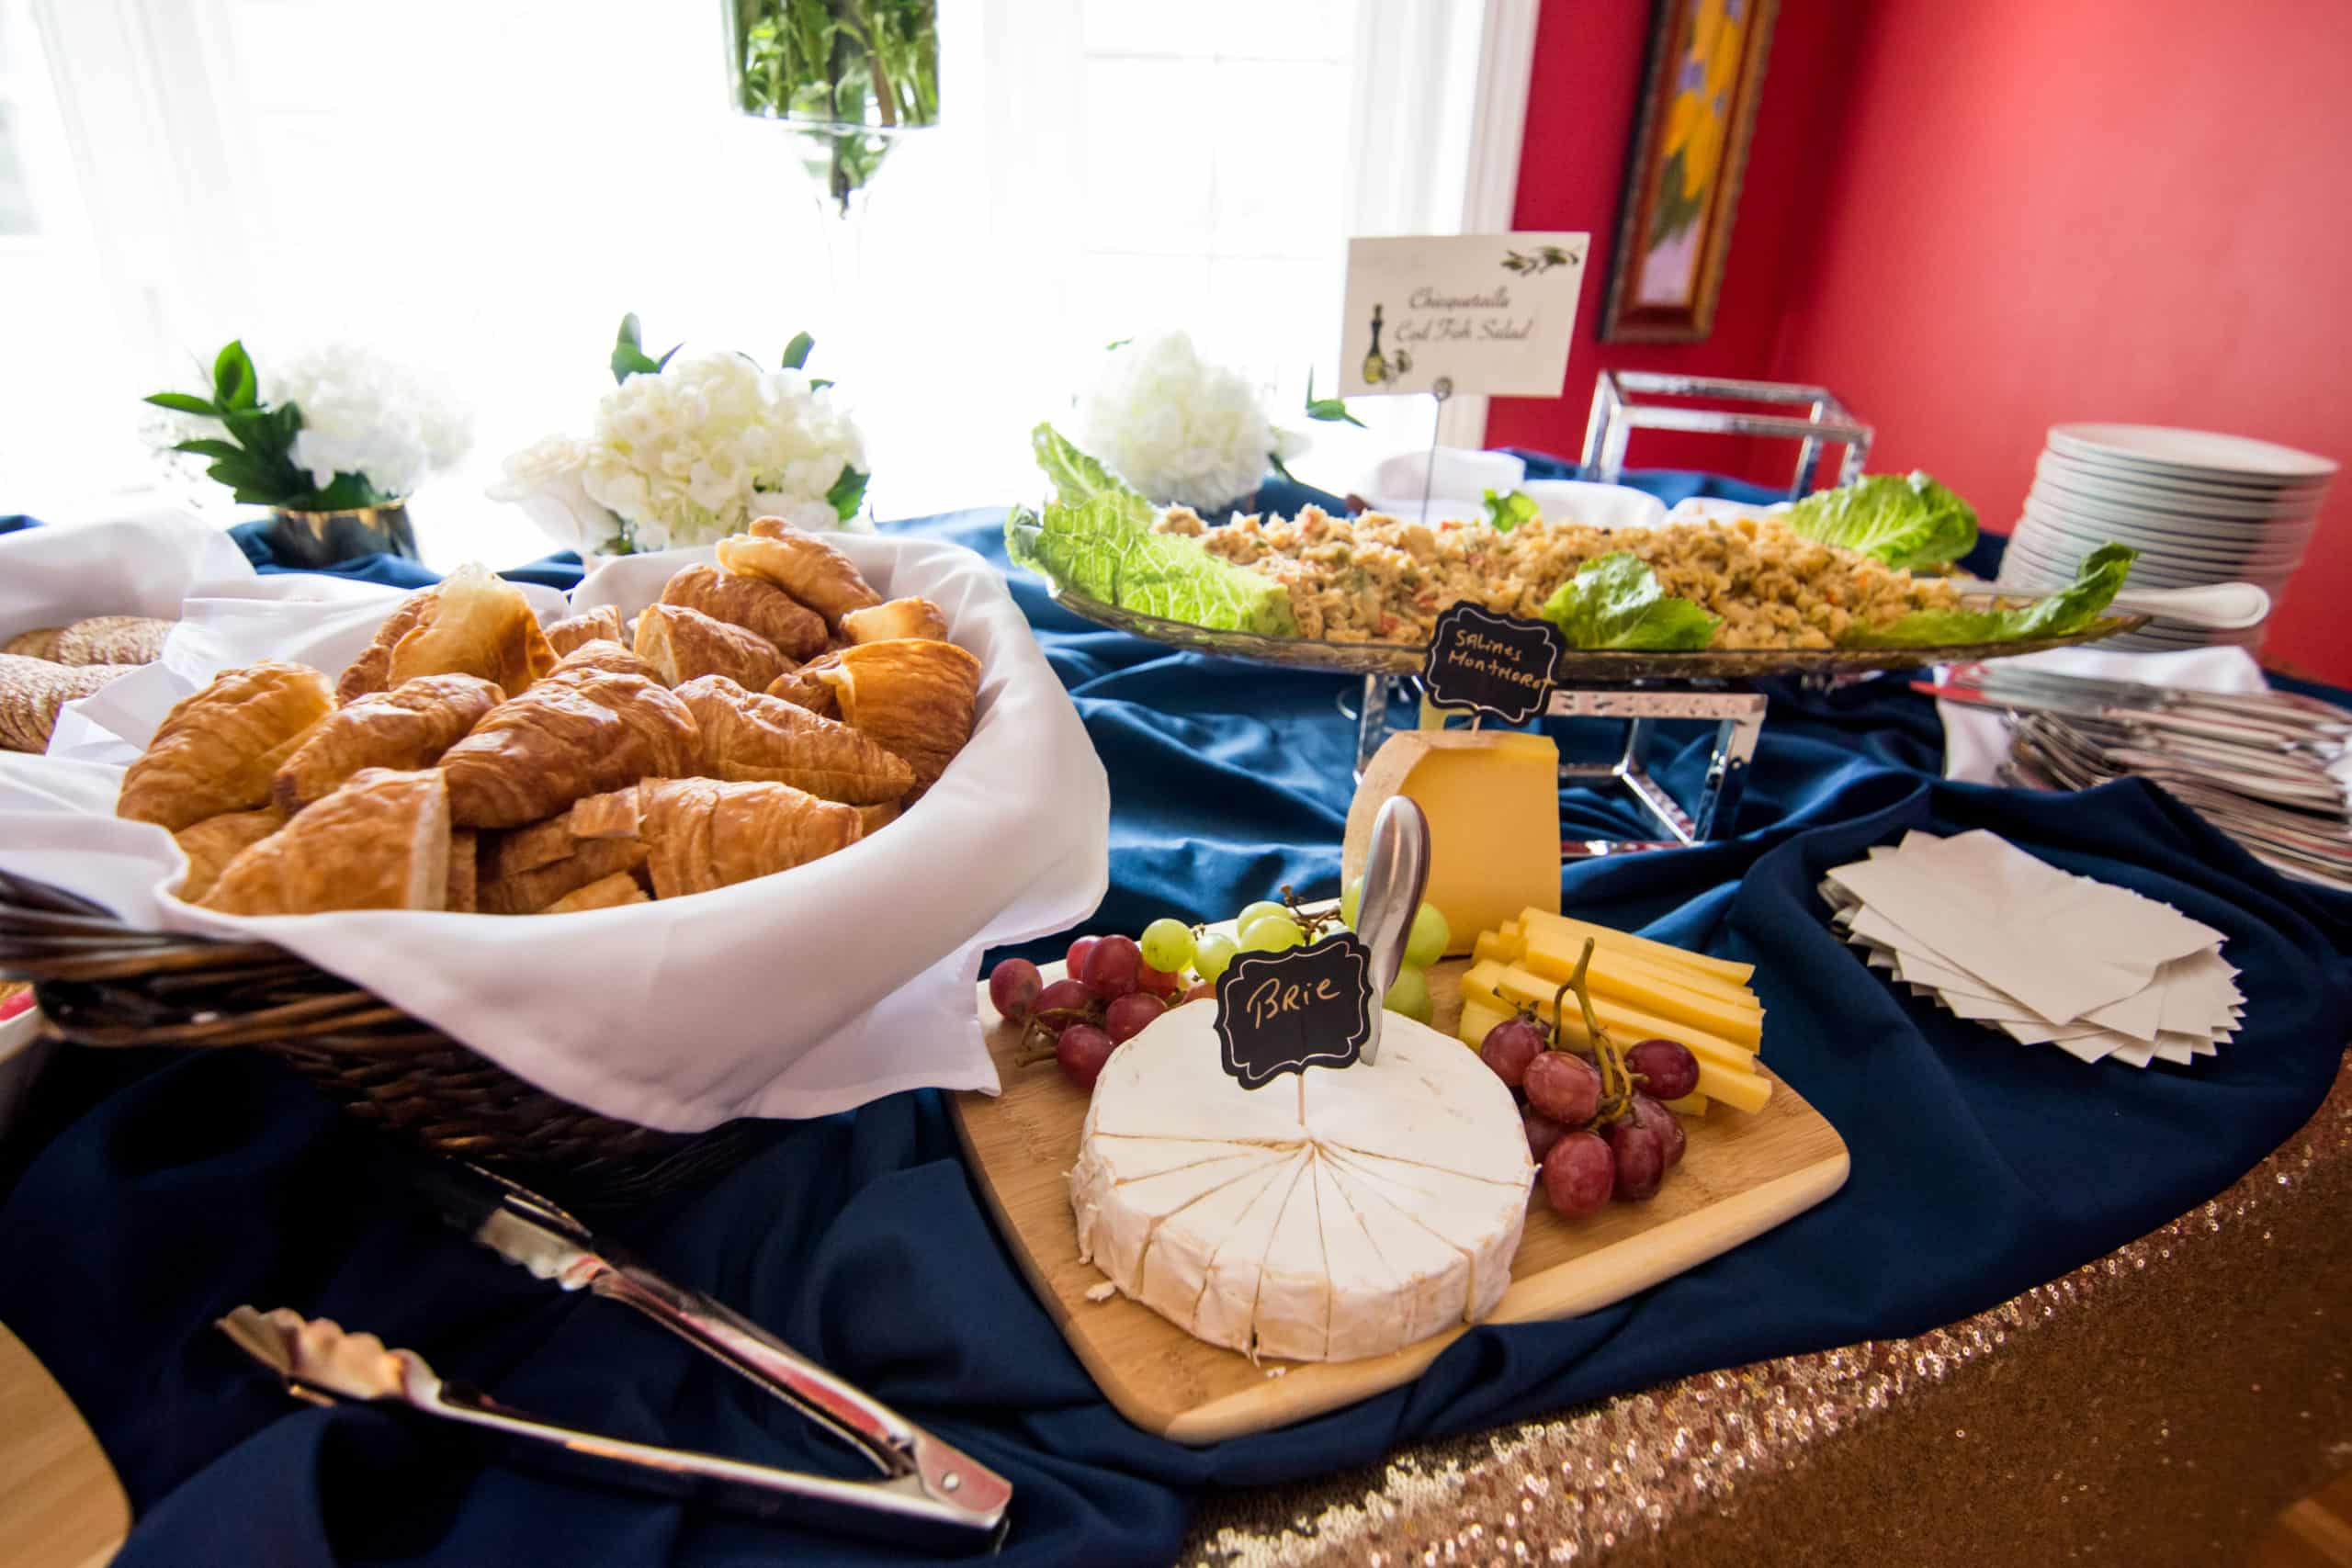 Boston Event Catering & Bar Services